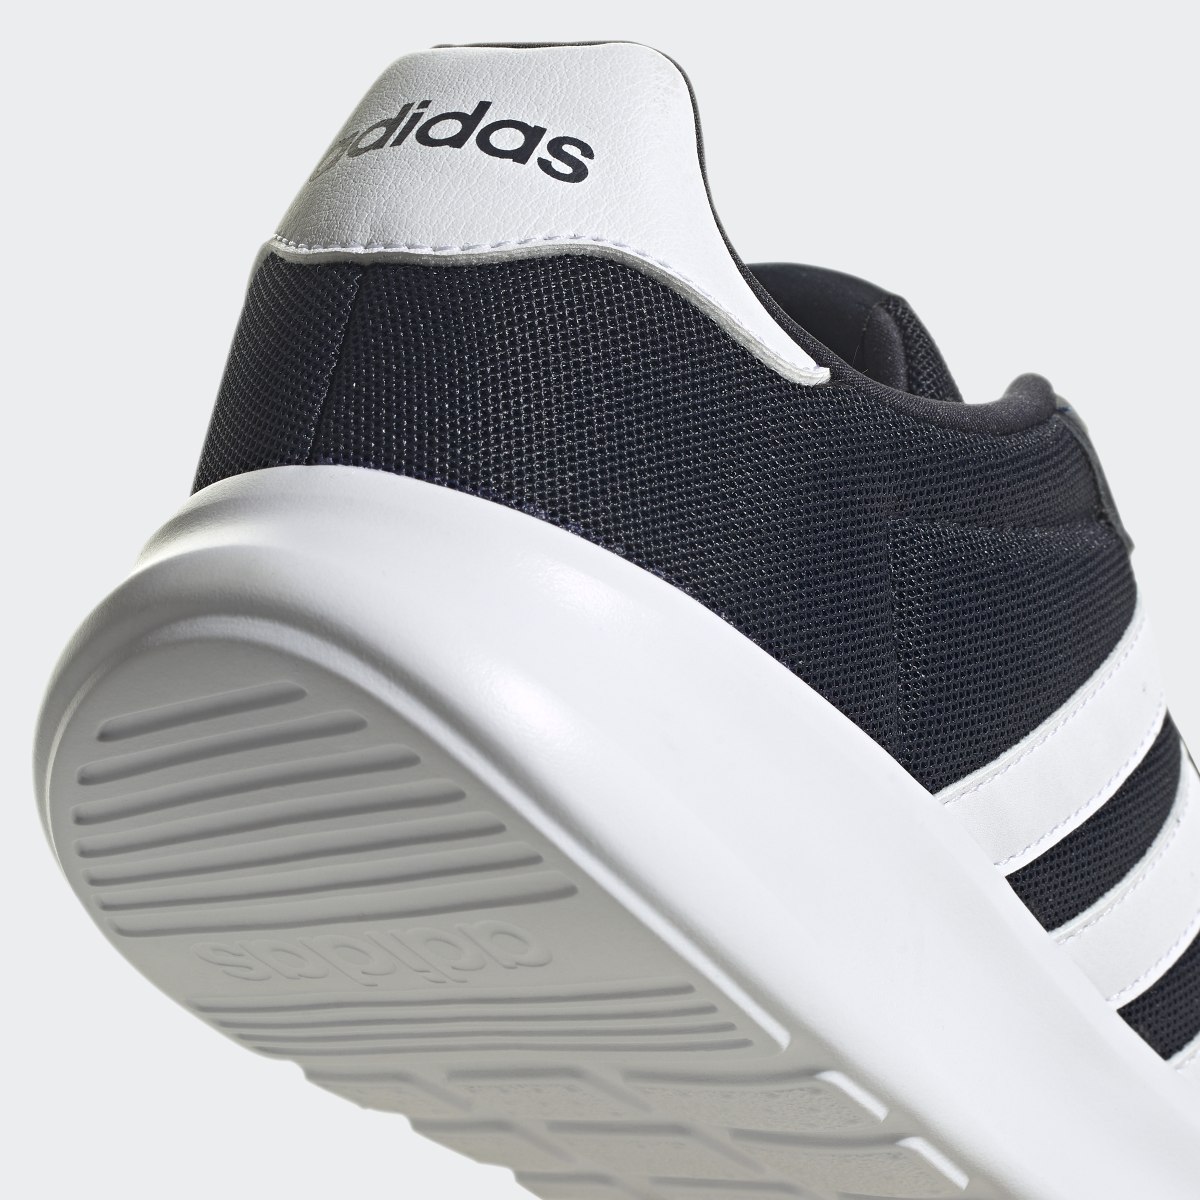 Adidas Lite Racer 3.0 Shoes. 10